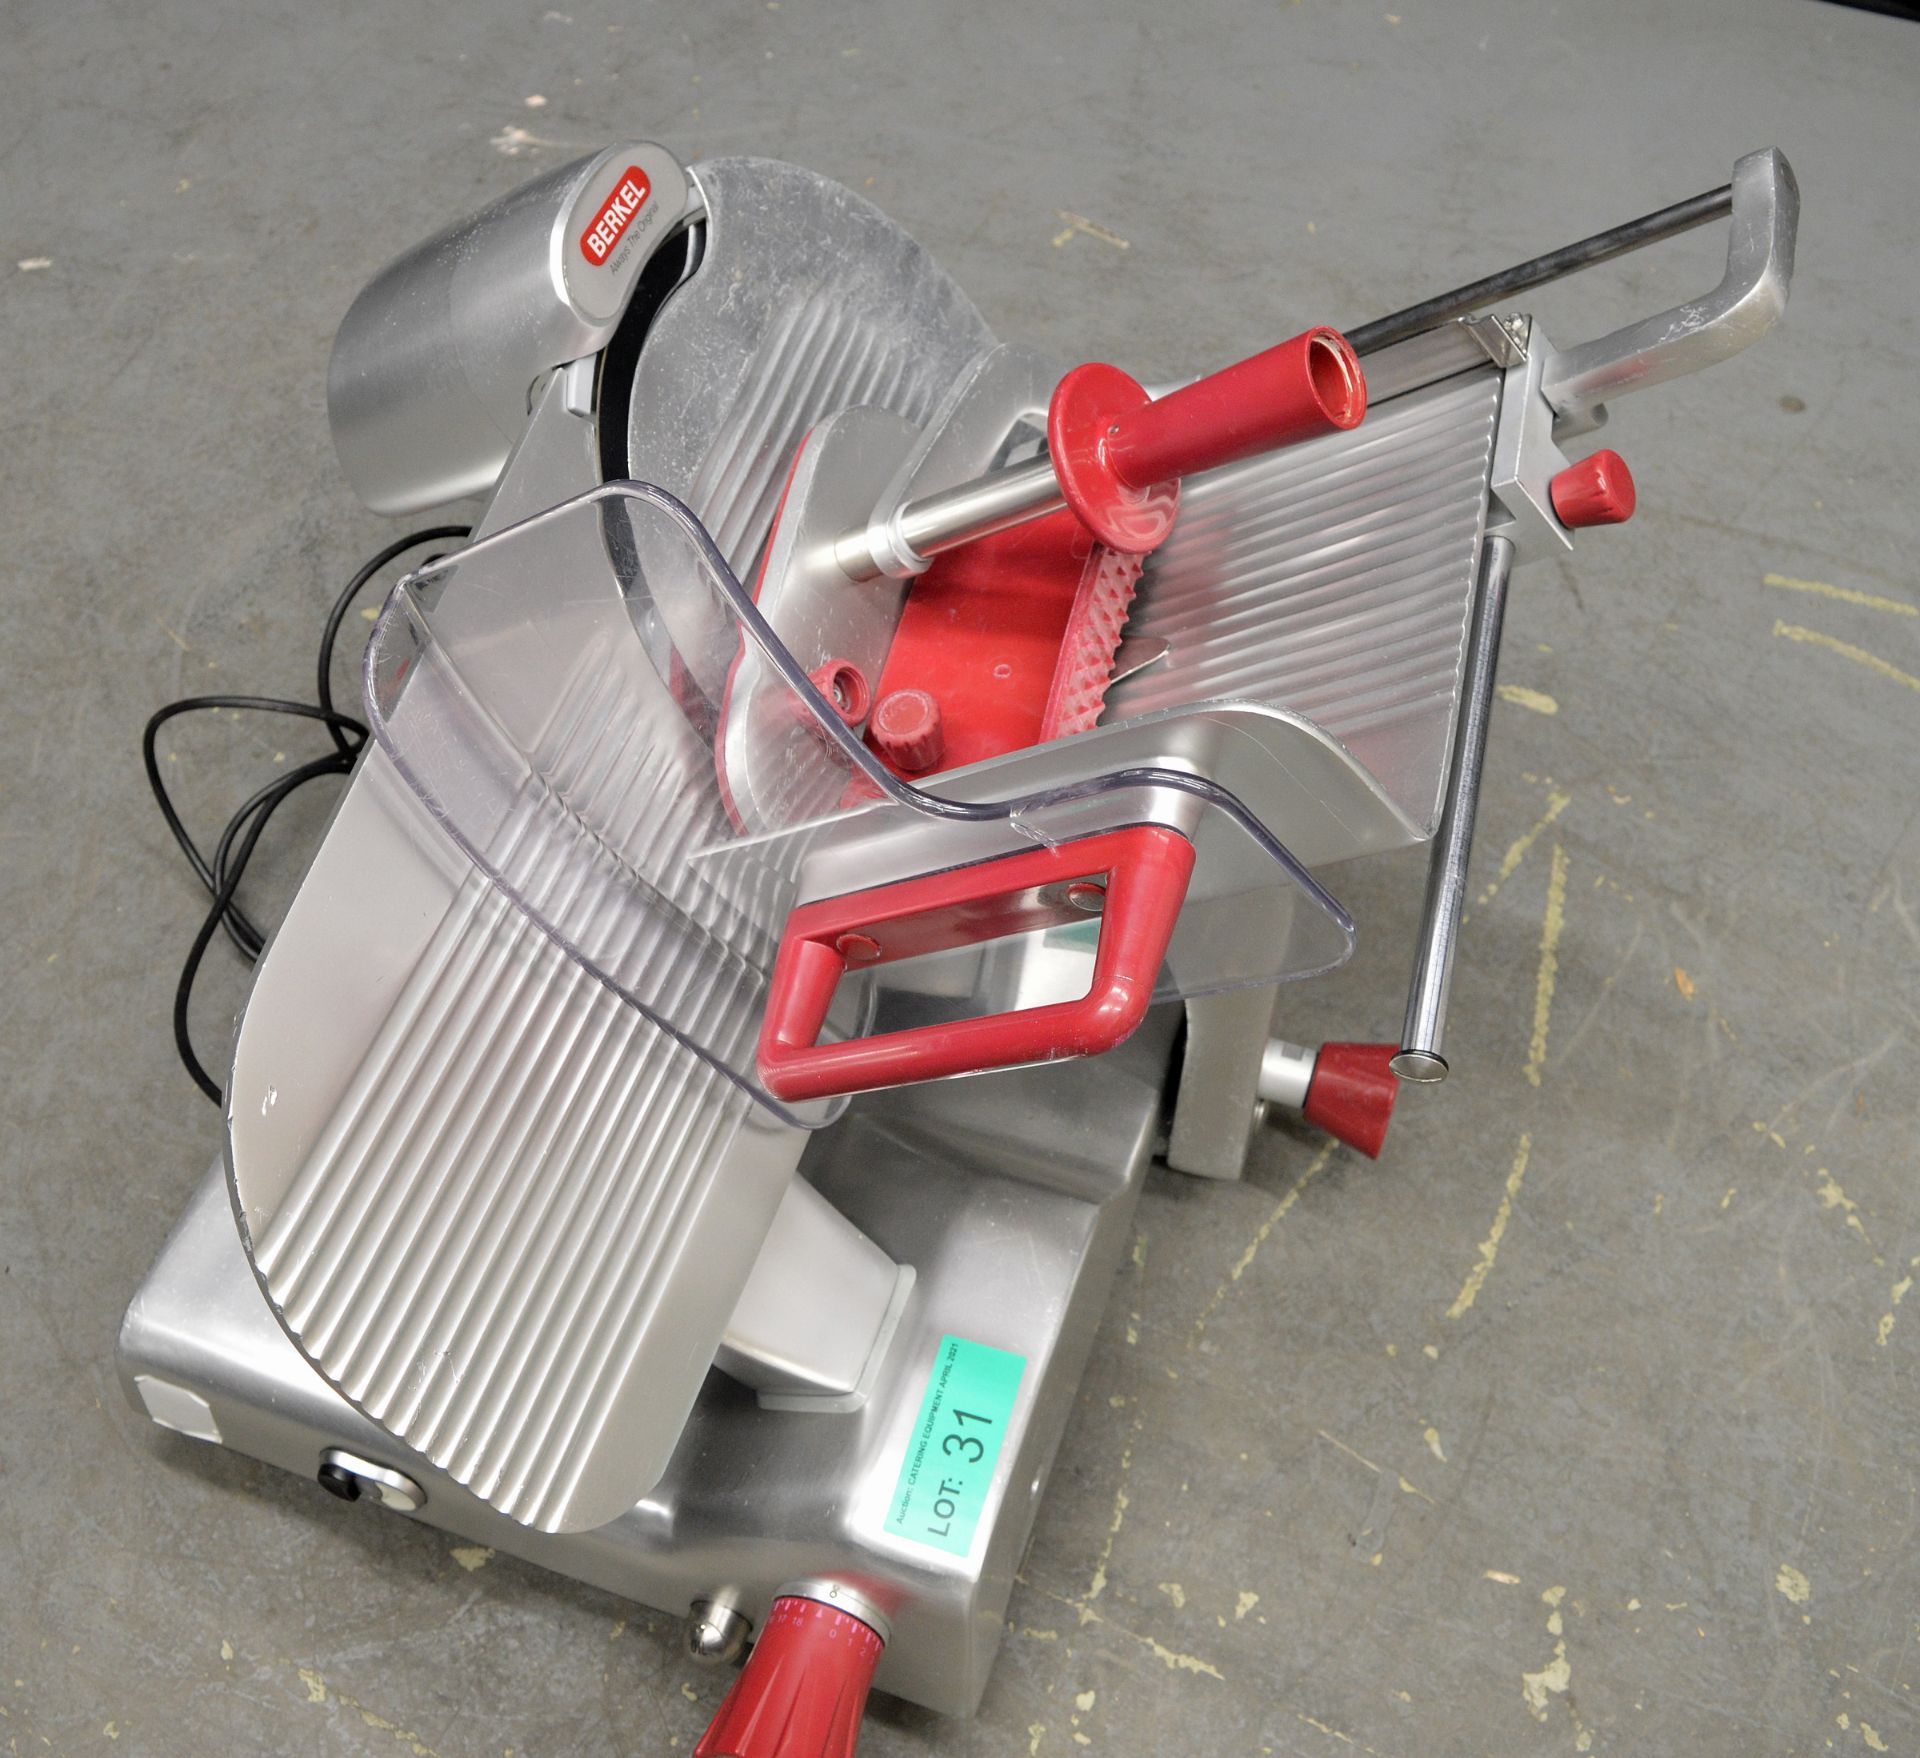 Berkel BSPGL04011A0F 12" Commercial Cooked Meat / Bacon Slicer, single phase electric - Image 8 of 8